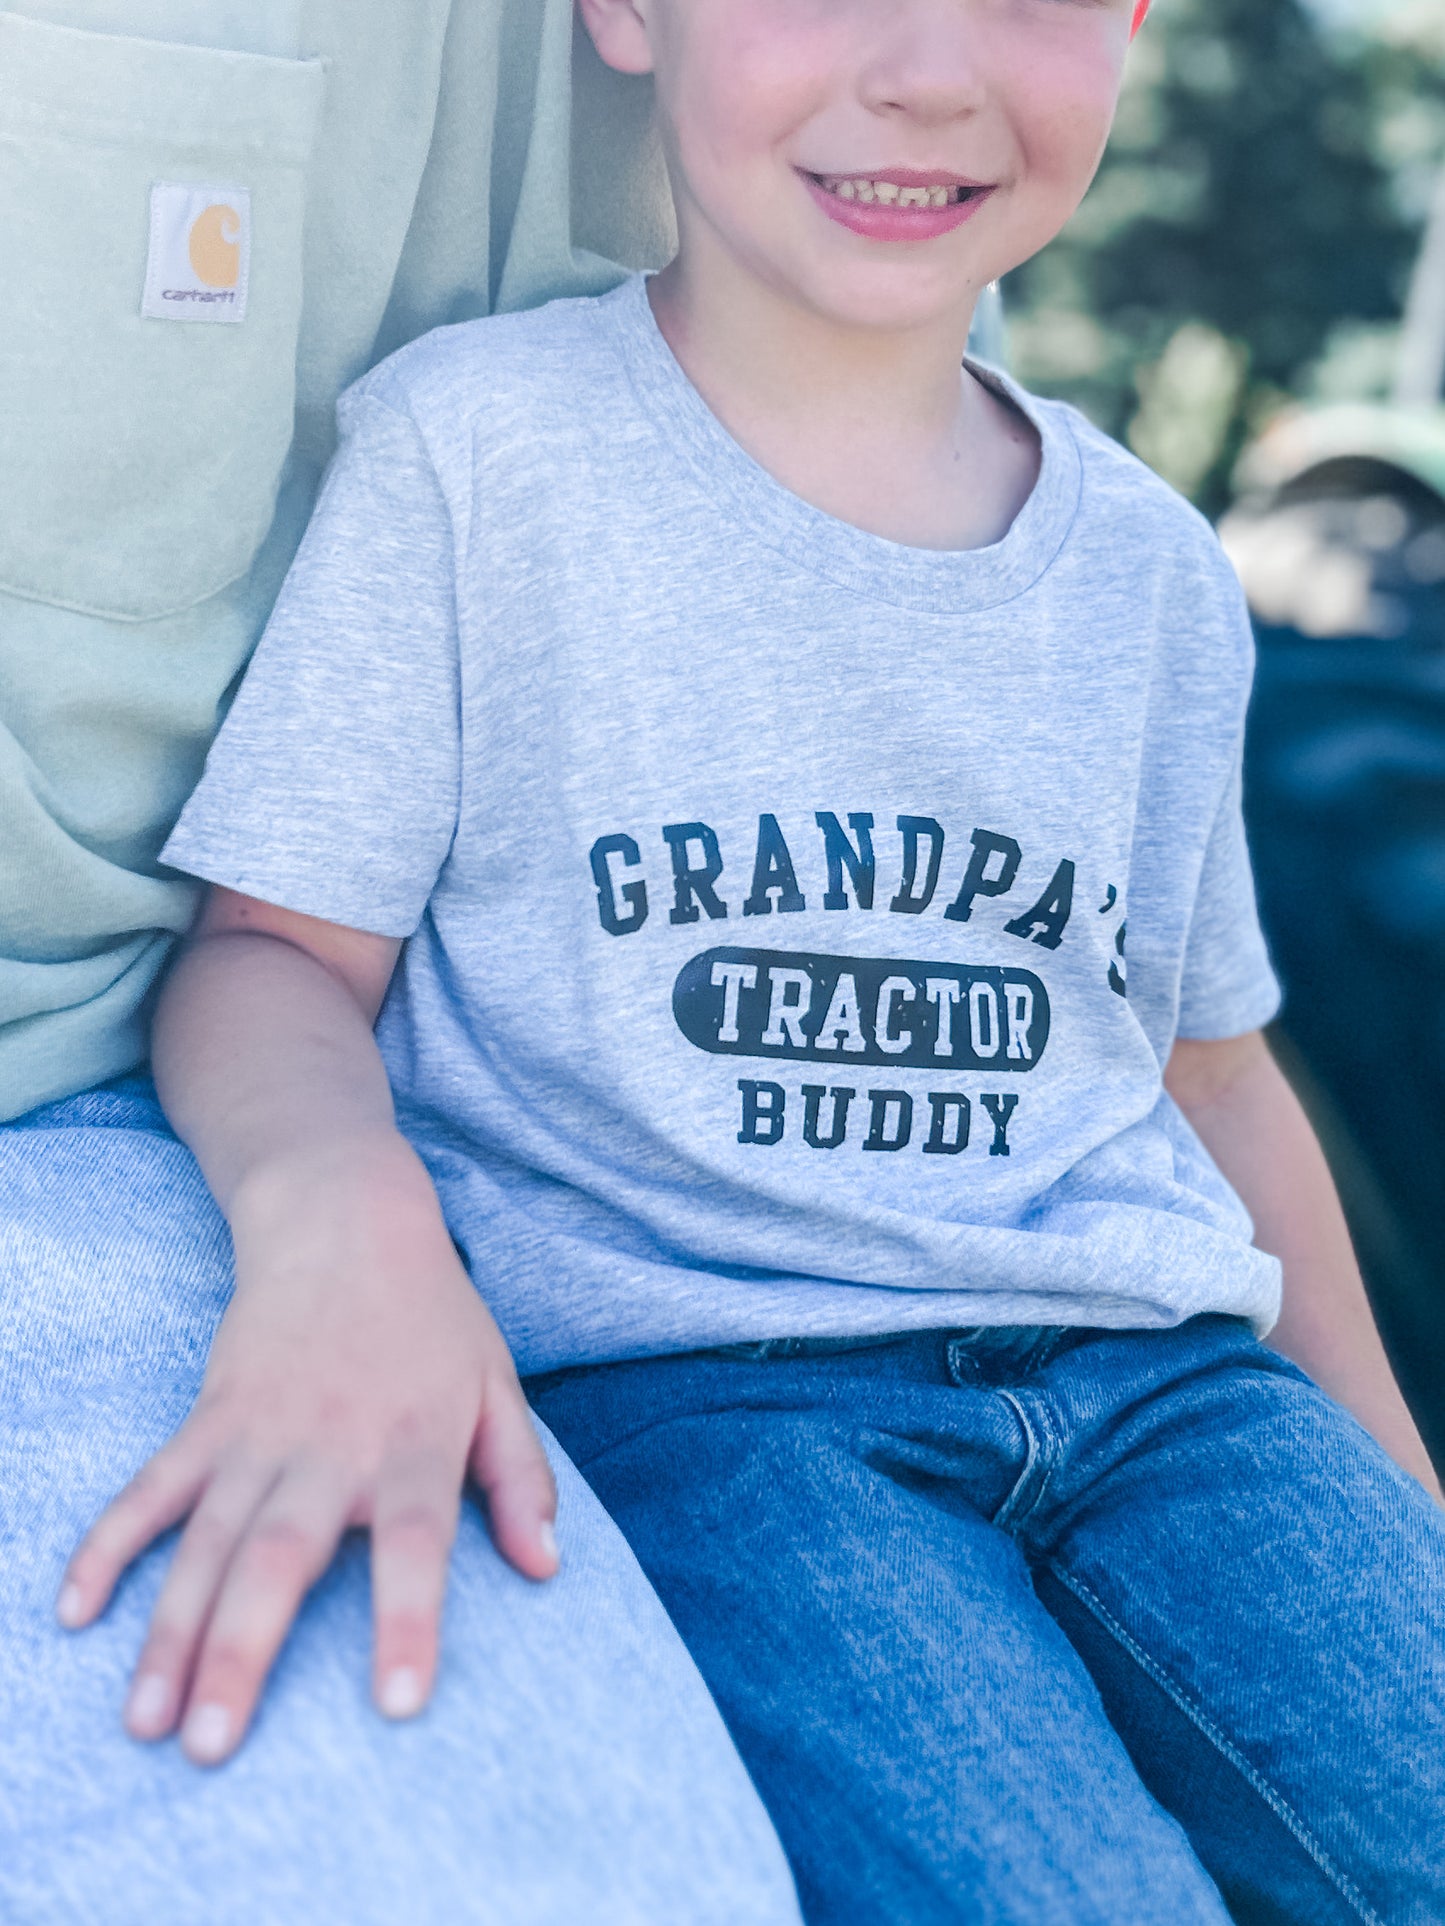 'Grandpas Tractor Buddy' Toddler/Youth Tees